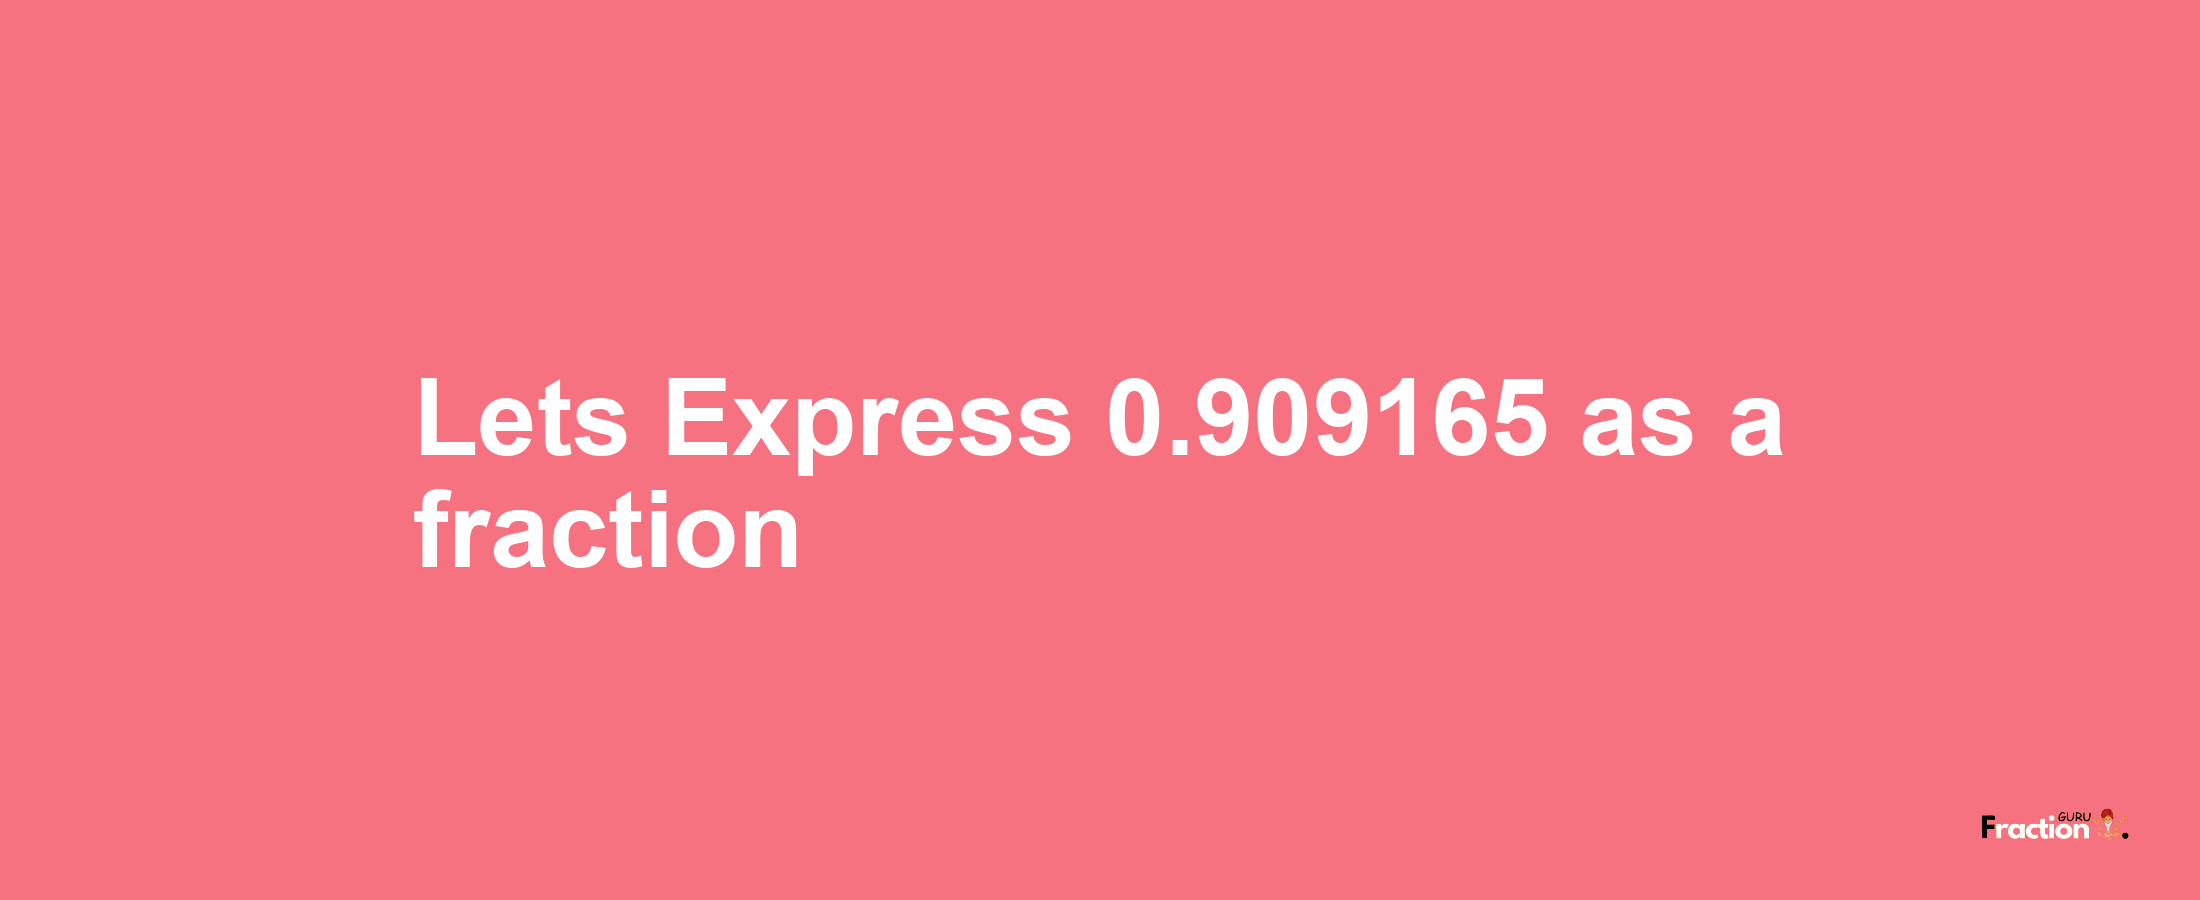 Lets Express 0.909165 as afraction